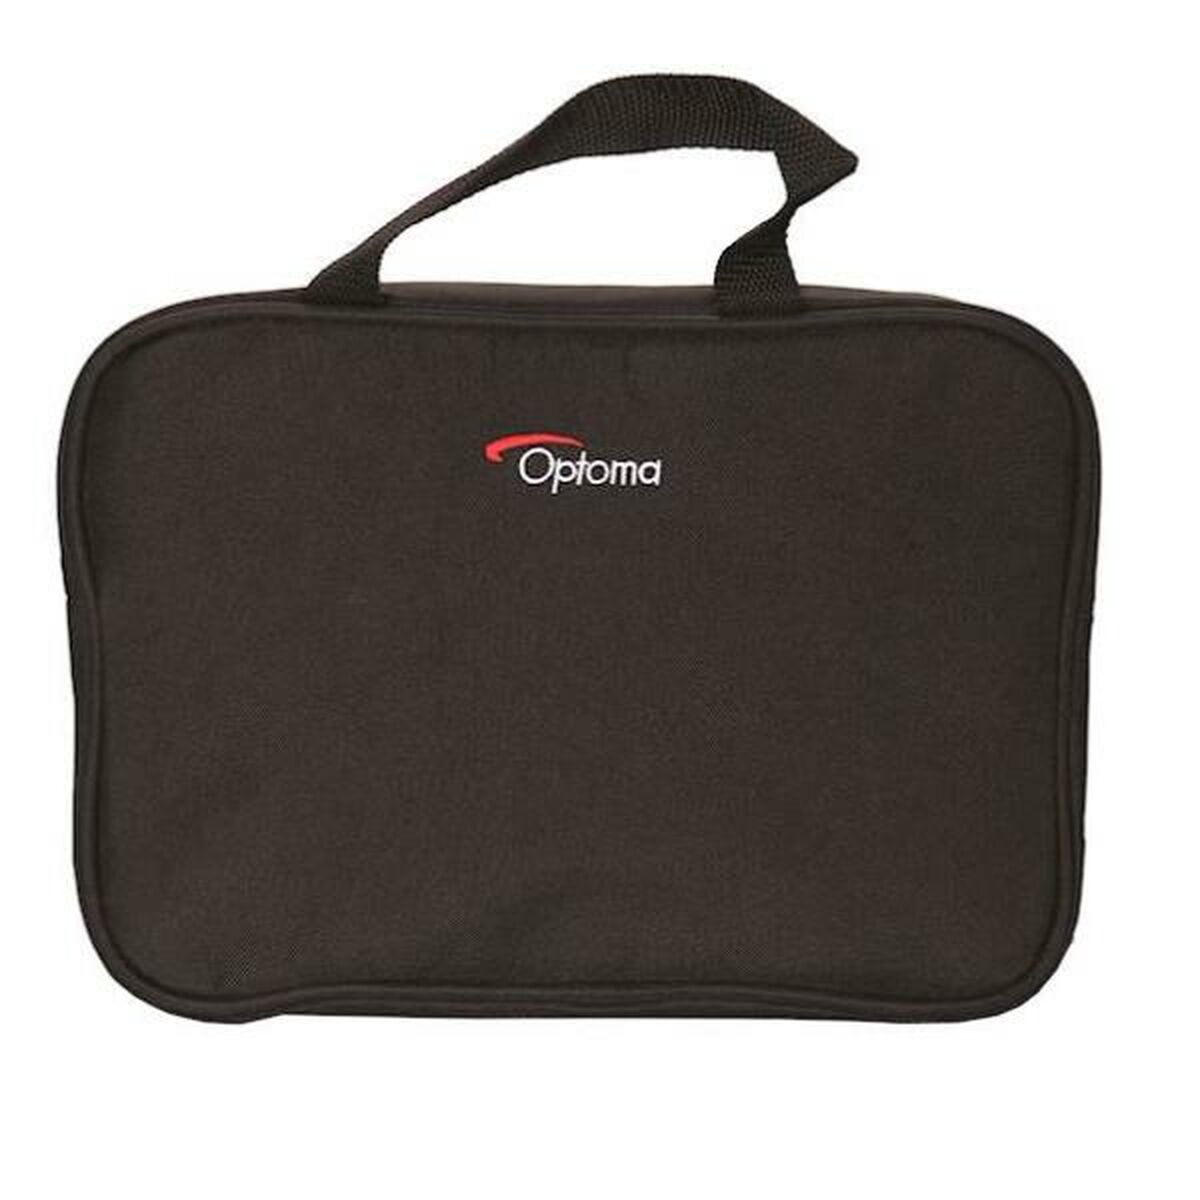 Protective Case Optoma SP.7AZR1GR01, Optoma, Electronics, TV, Video and home cinema, protective-case-optoma-sp-7azr1gr01, Brand_Optoma, category-reference-2609, category-reference-2642, category-reference-2947, category-reference-t-18805, category-reference-t-19653, category-reference-t-19921, category-reference-t-21391, category-reference-t-25699, cinema and television, Condition_NEW, entertainment, Price_50 - 100, RiotNook